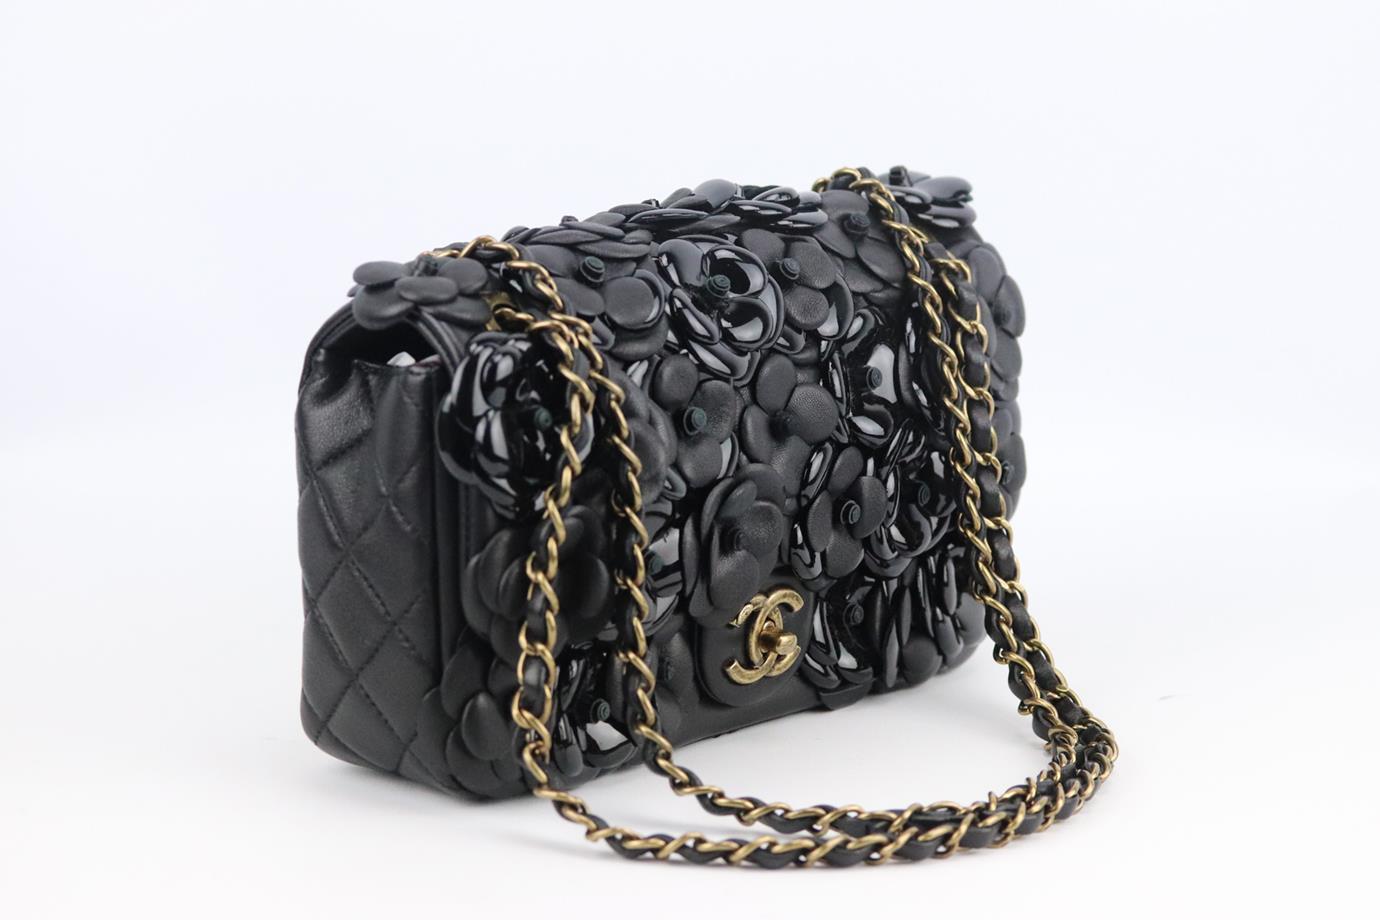 Chanel 2015 Classic small camellia leather single flap bag. Made from black leather with CC gold-tone hardware on the front and layered Camelia design, it has a large internal compartment with two slit pockets. Black. Twist lock at front. Comes with